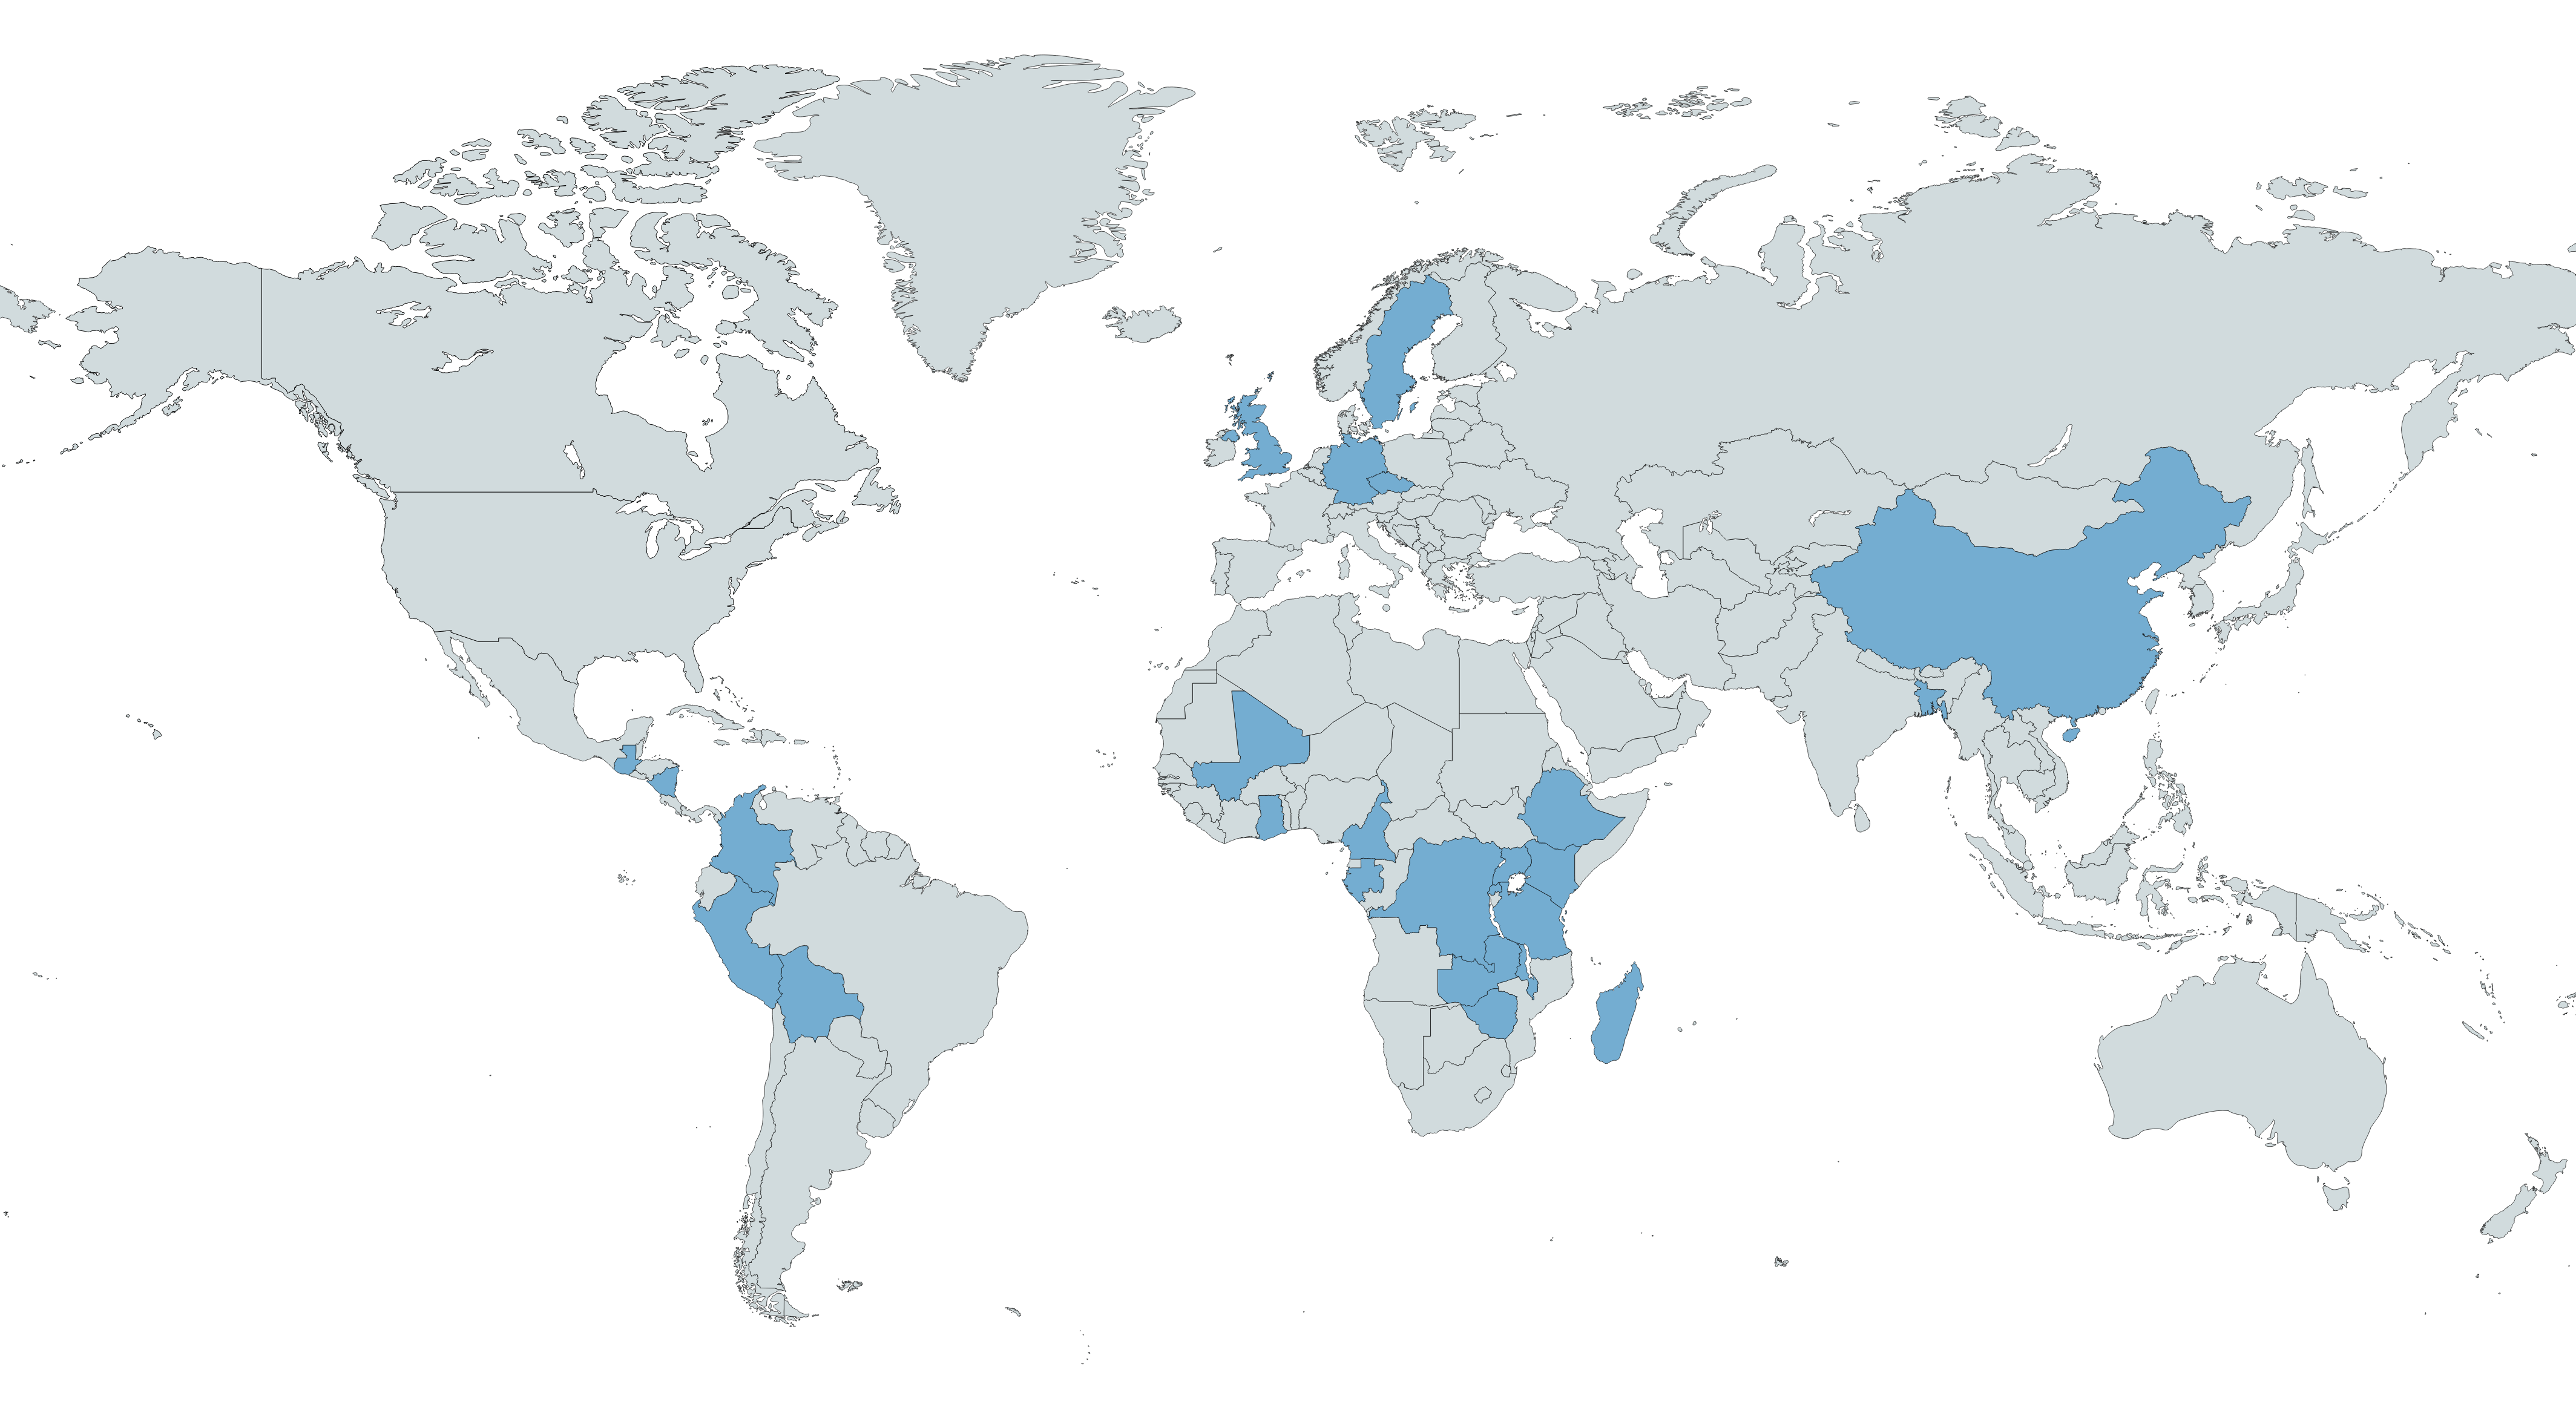 World map showing countries where there is IDEEL research or collaborations.